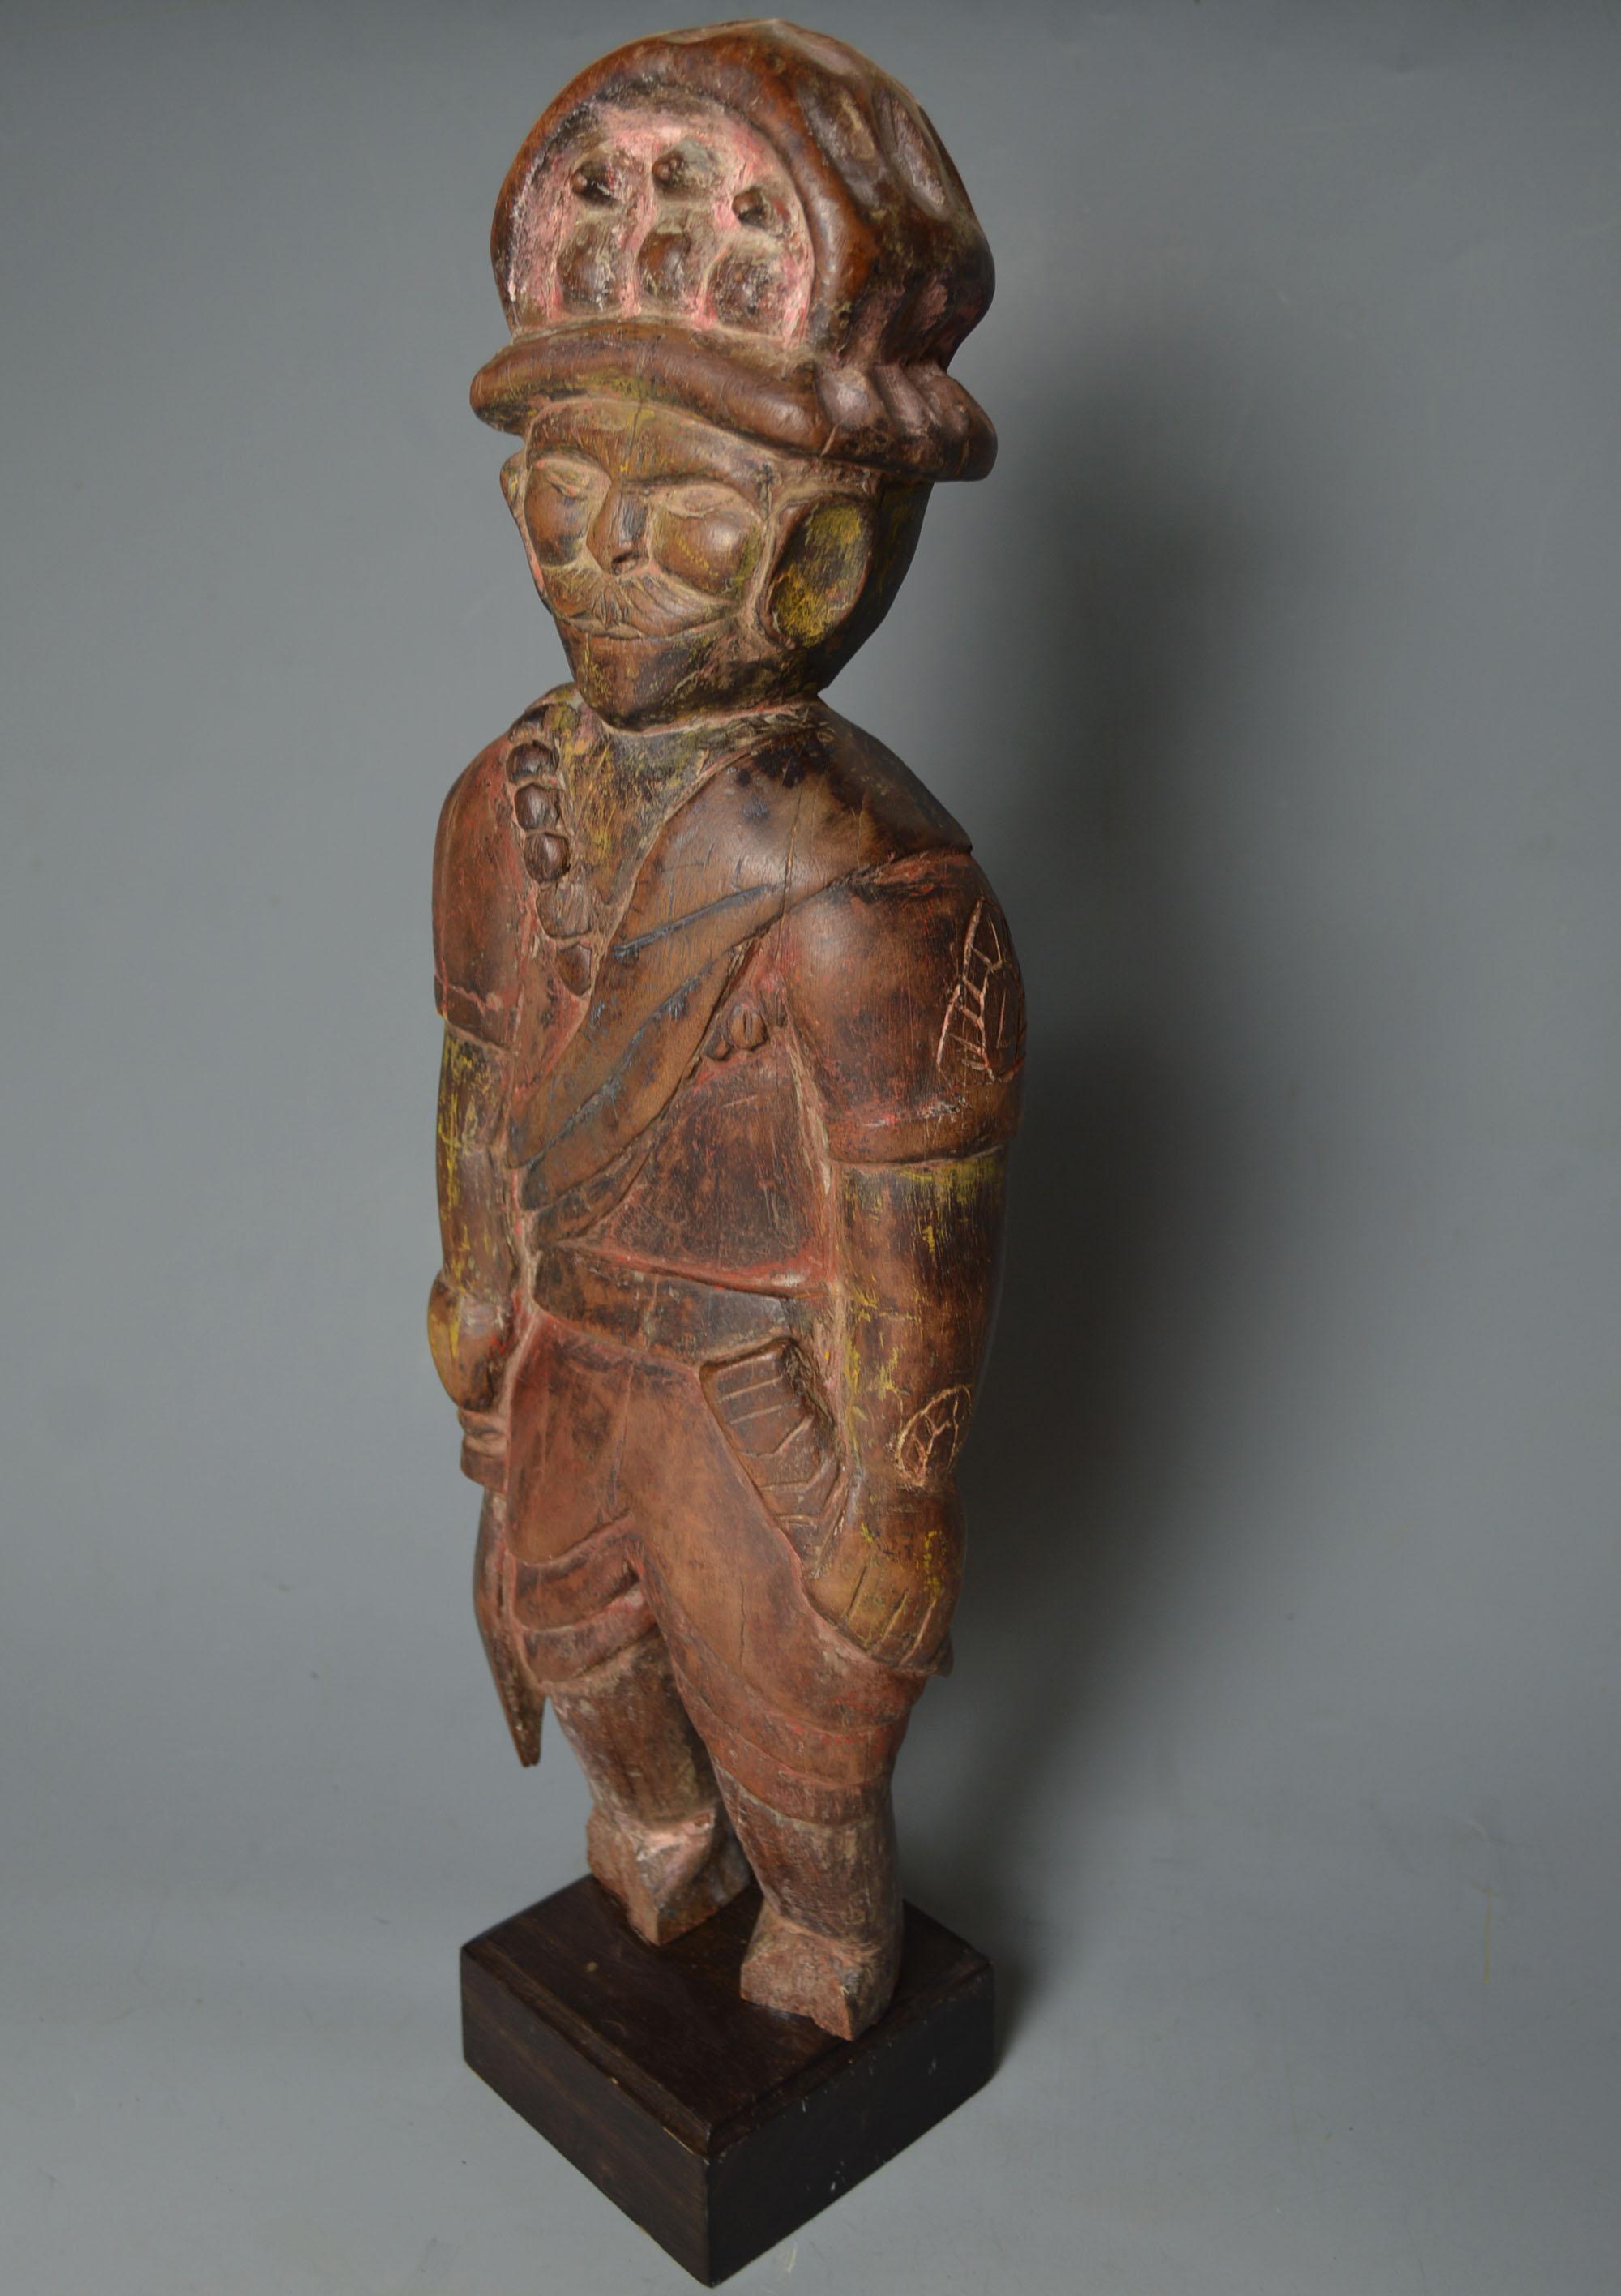 A rare and interesting old Himalayan / Tibetan folk art figure of a soldier or warrior.
The standing figure with large Avian embellished headdress with bandolier and holding a sword, the face finely and skilfully carved with distinct Himalayan